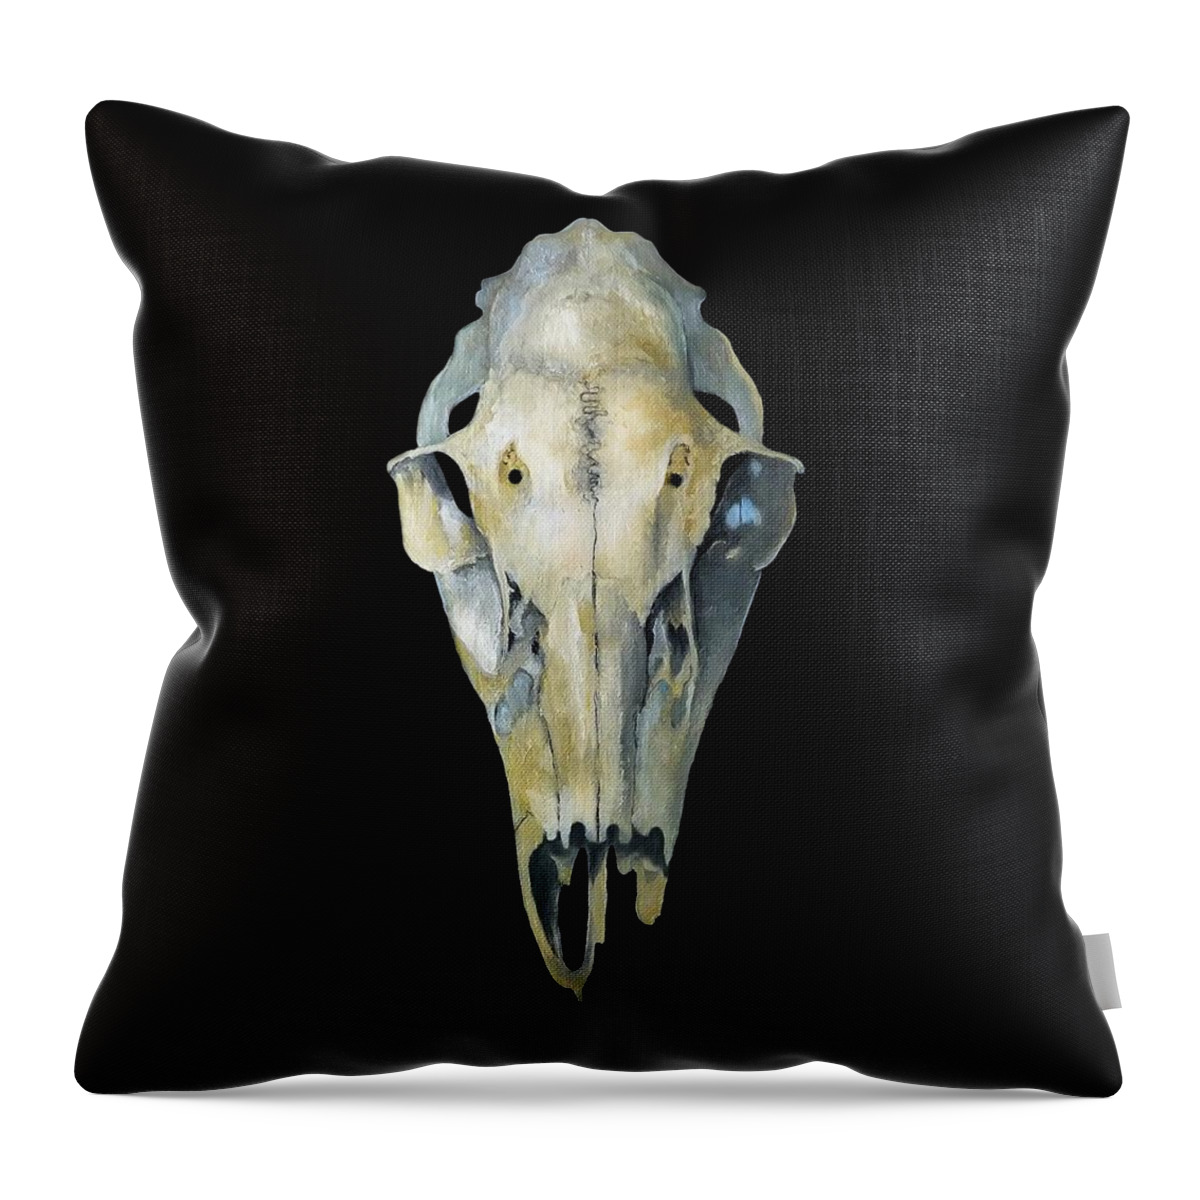 Deer Throw Pillow featuring the painting Deer Skull Aura by Catherine Twomey